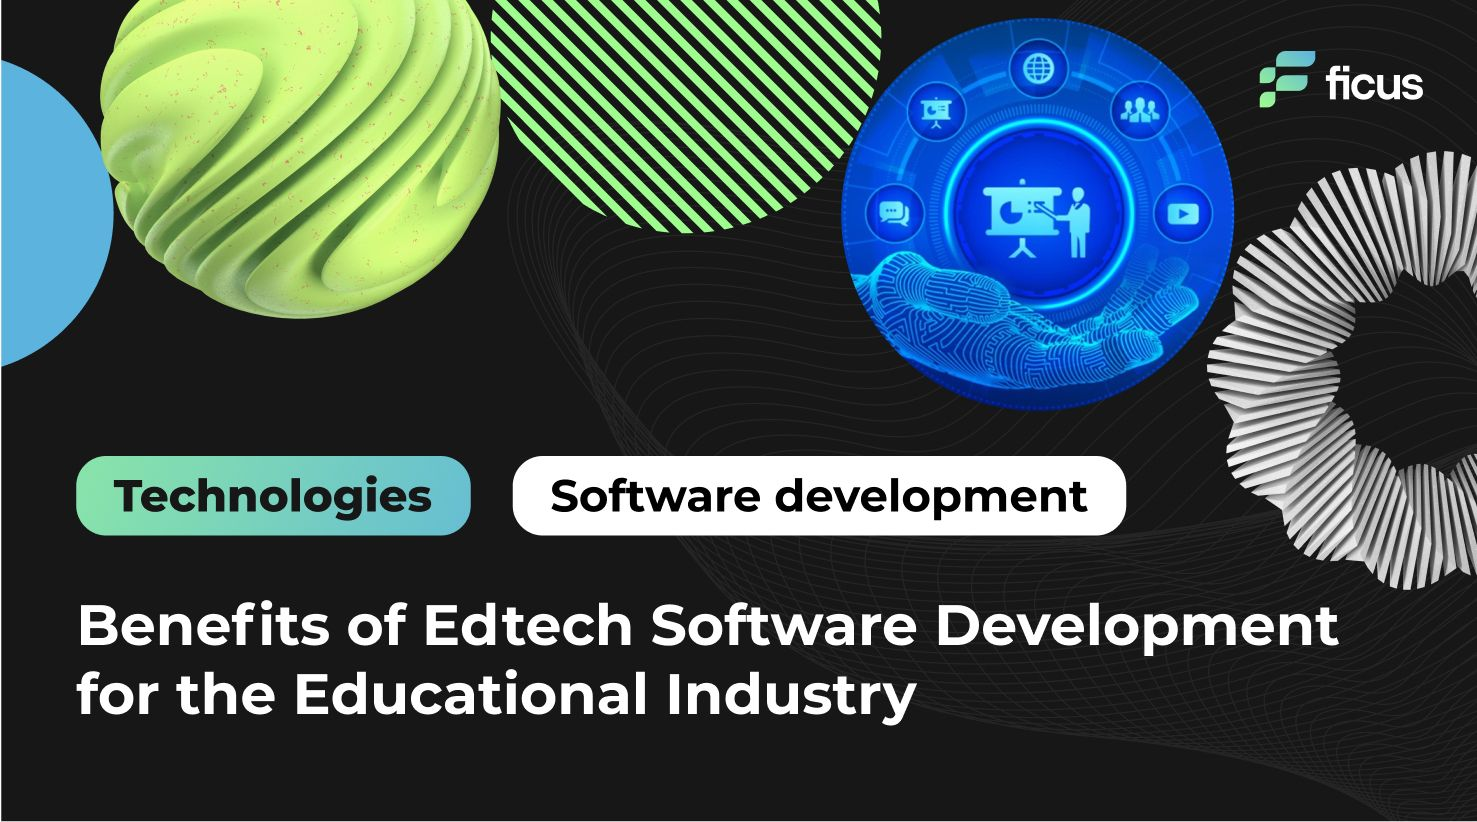 Benefits of Edtech Software Development for the Educational Industry